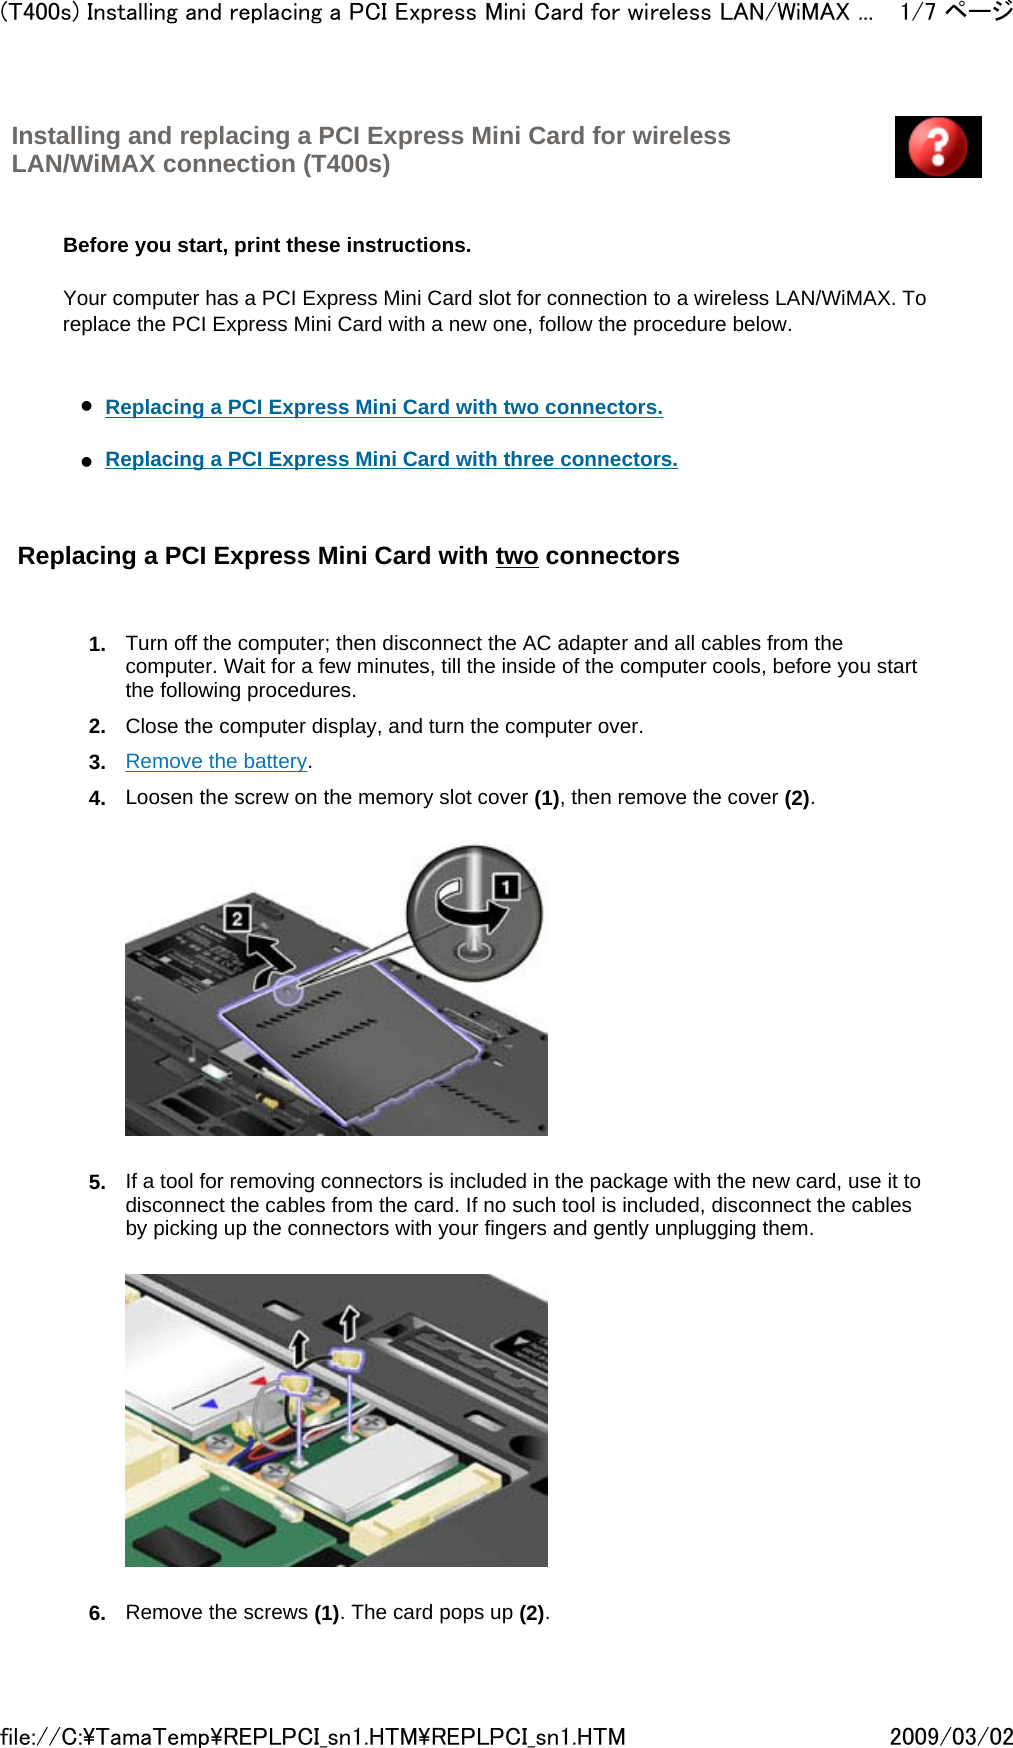 Installing and replacing a PCI Express Mini Card for wireless LAN/WiMAX connection (T400s)         Before you start, print these instructions.   Your computer has a PCI Express Mini Card slot for connection to a wireless LAN/WiMAX. To replace the PCI Express Mini Card with a new one, follow the procedure below.     zReplacing a PCI Express Mini Card with two connectors.     zReplacing a PCI Express Mini Card with three connectors.    Replacing a PCI Express Mini Card with two connectors   1. Turn off the computer; then disconnect the AC adapter and all cables from the computer. Wait for a few minutes, till the inside of the computer cools, before you start the following procedures.  2. Close the computer display, and turn the computer over.  3. Remove the battery.  4. Loosen the screw on the memory slot cover (1), then remove the cover (2).       5. If a tool for removing connectors is included in the package with the new card, use it to disconnect the cables from the card. If no such tool is included, disconnect the cables by picking up the connectors with your fingers and gently unplugging them.       6. Remove the screws (1). The card pops up (2).    1/7 ページ(T400s) Installing and replacing a PCI Express Mini Card for wireless LAN/WiMAX ...2009/03/02file://C:\TamaTemp\REPLPCI_sn1.HTM\REPLPCI_sn1.HTM